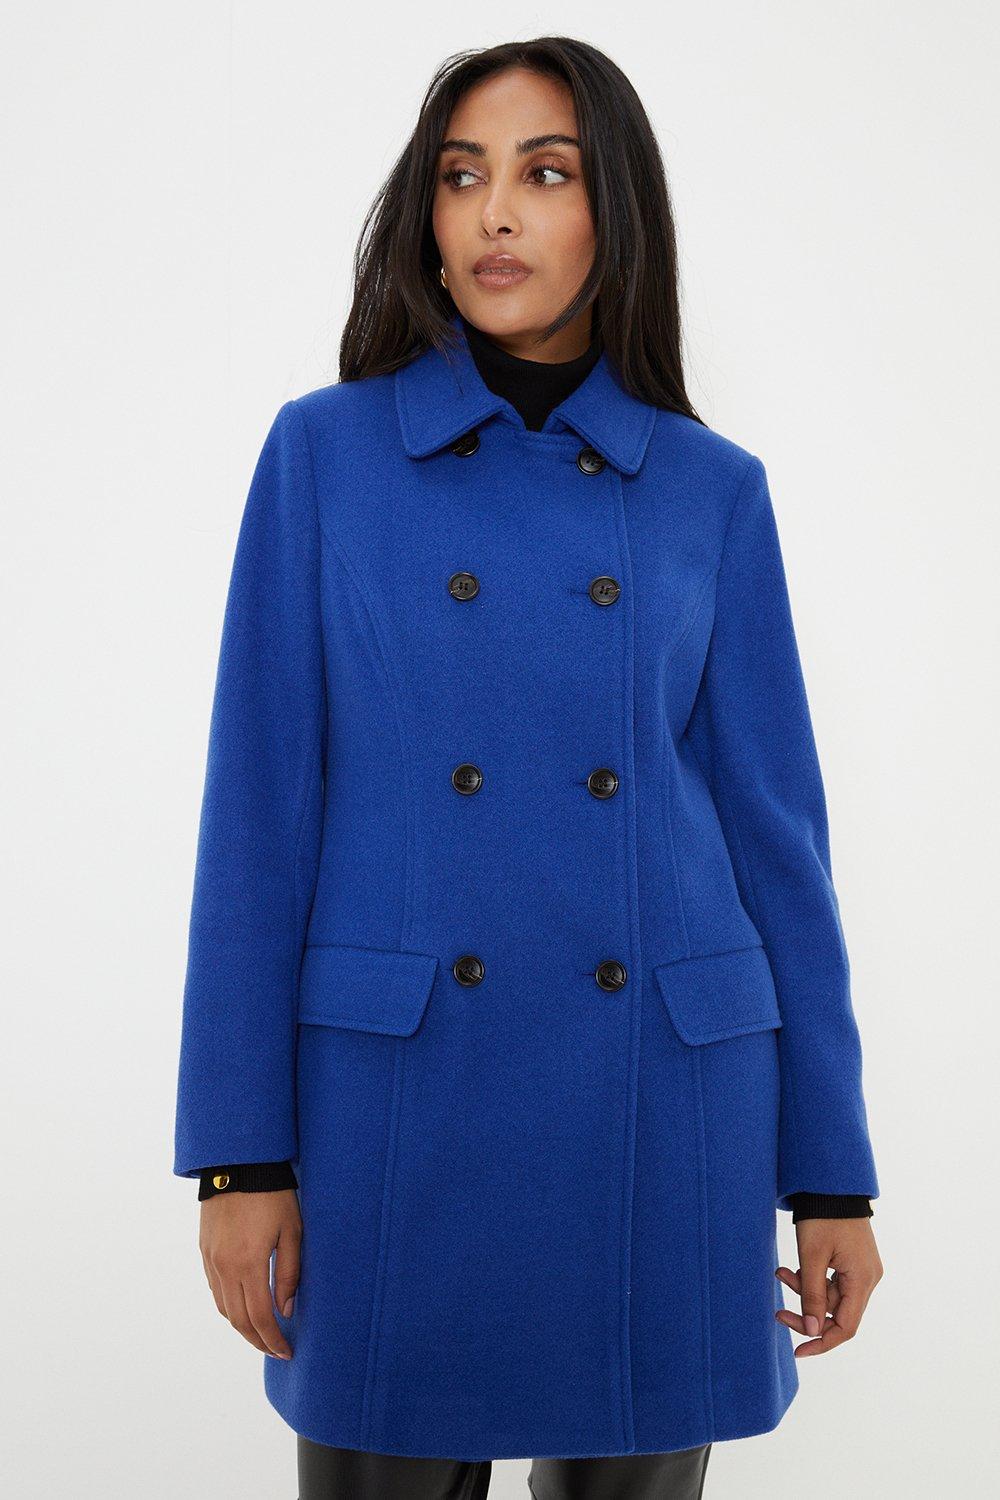 Womens Petite Blue Double Breasted Pea Coat